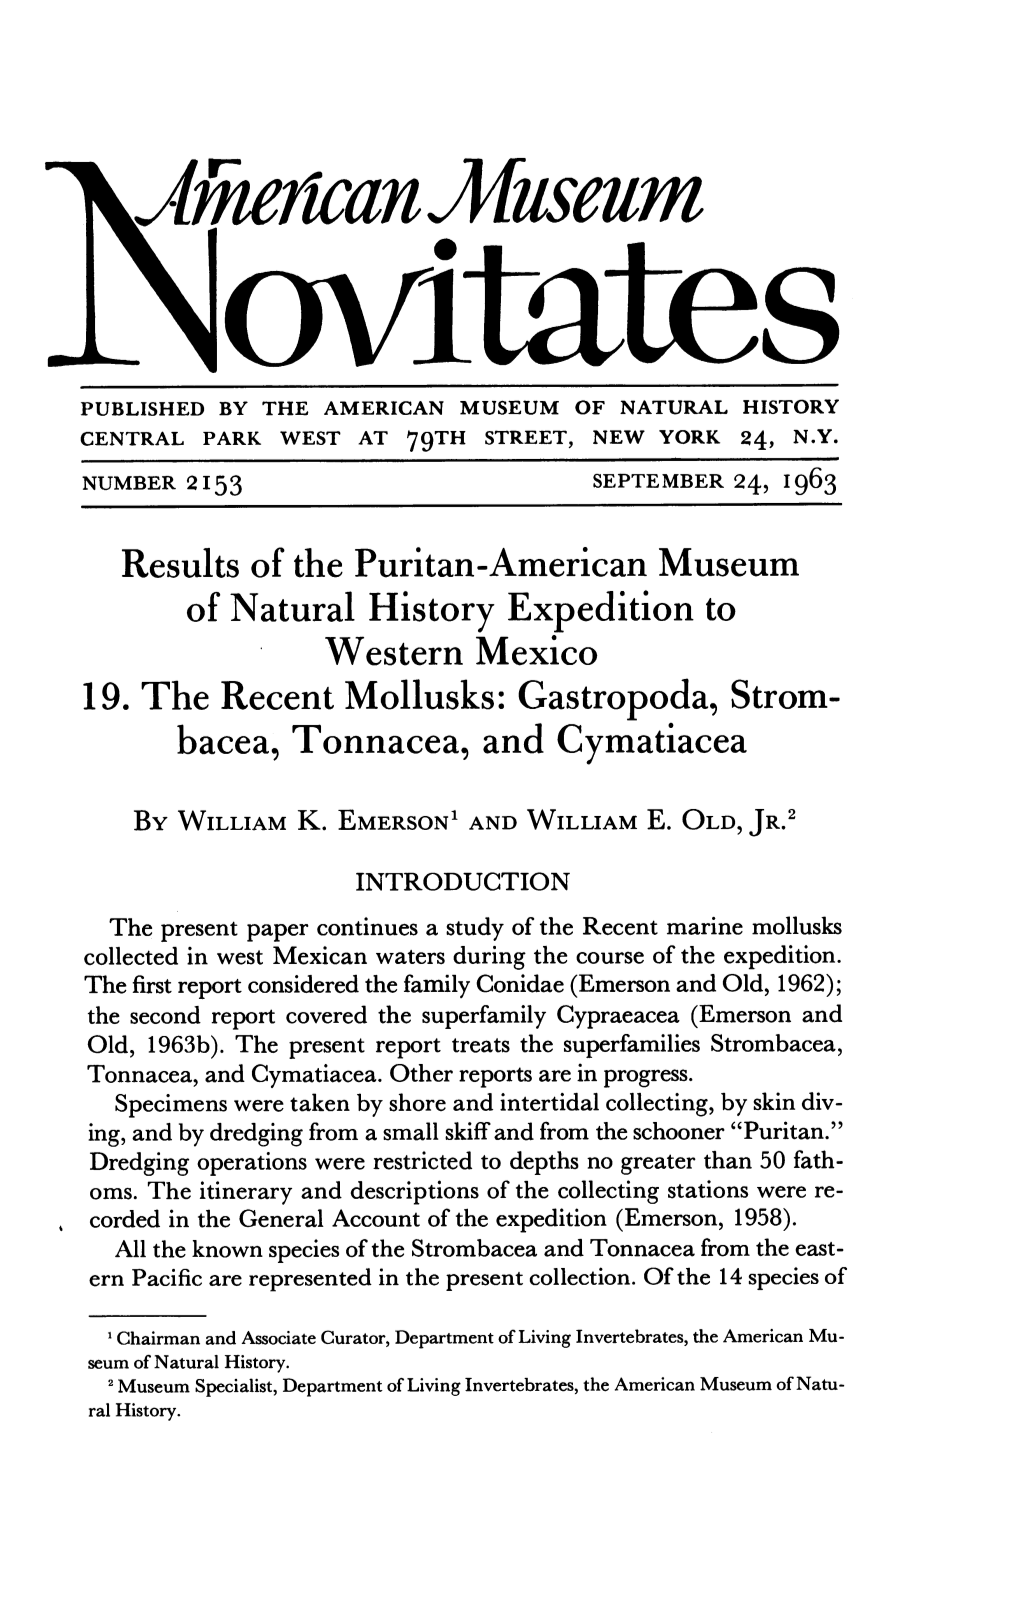 Results of the Puritan-American Museum of Natural History Expedition to Western Mexico 19